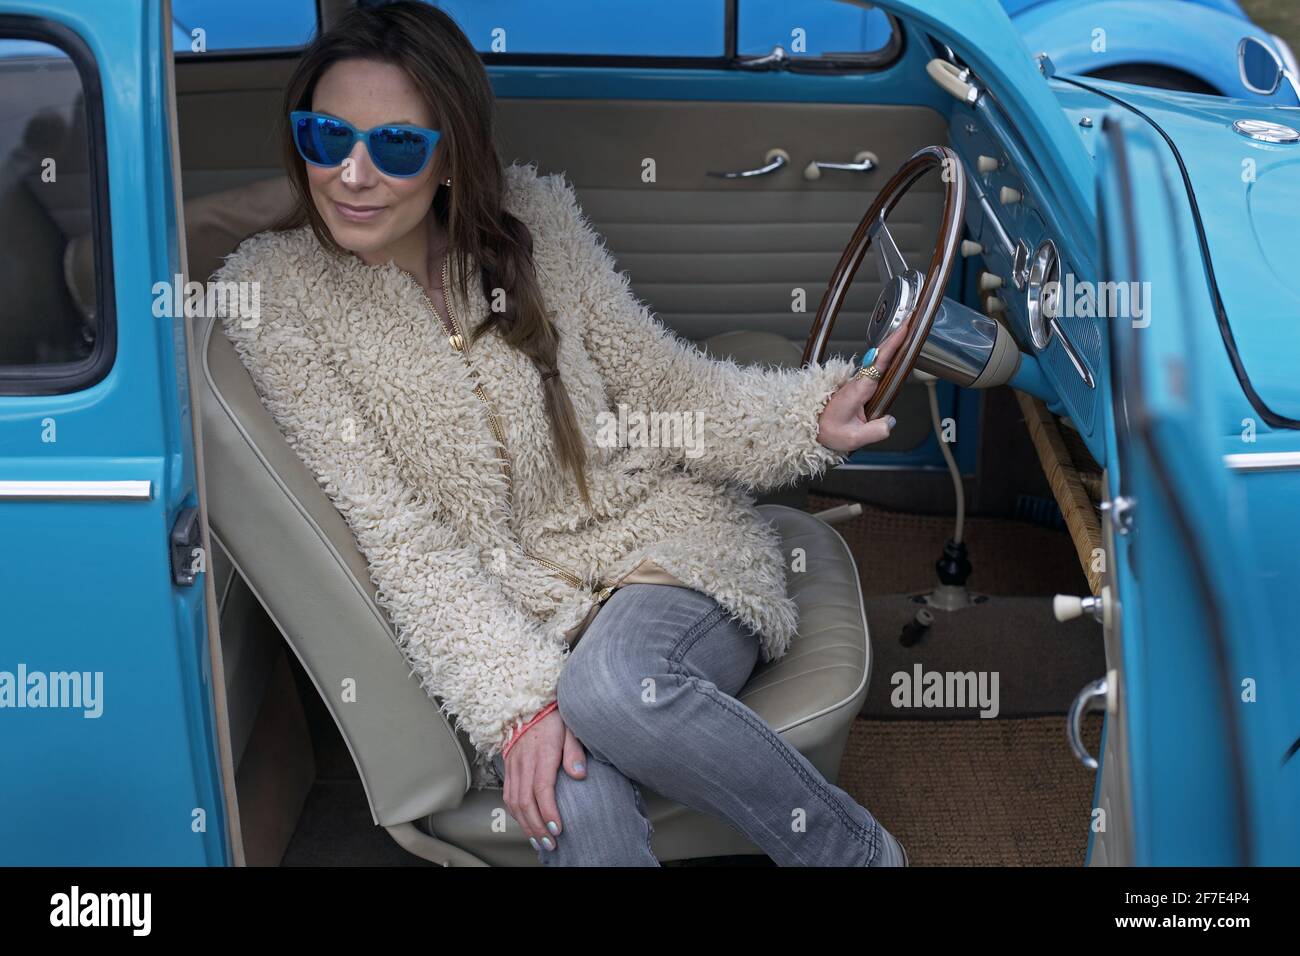 GREAT BRITAIN / England /Young woman with blue sunglasses sitting in 1961 Volkswagen . Stock Photo